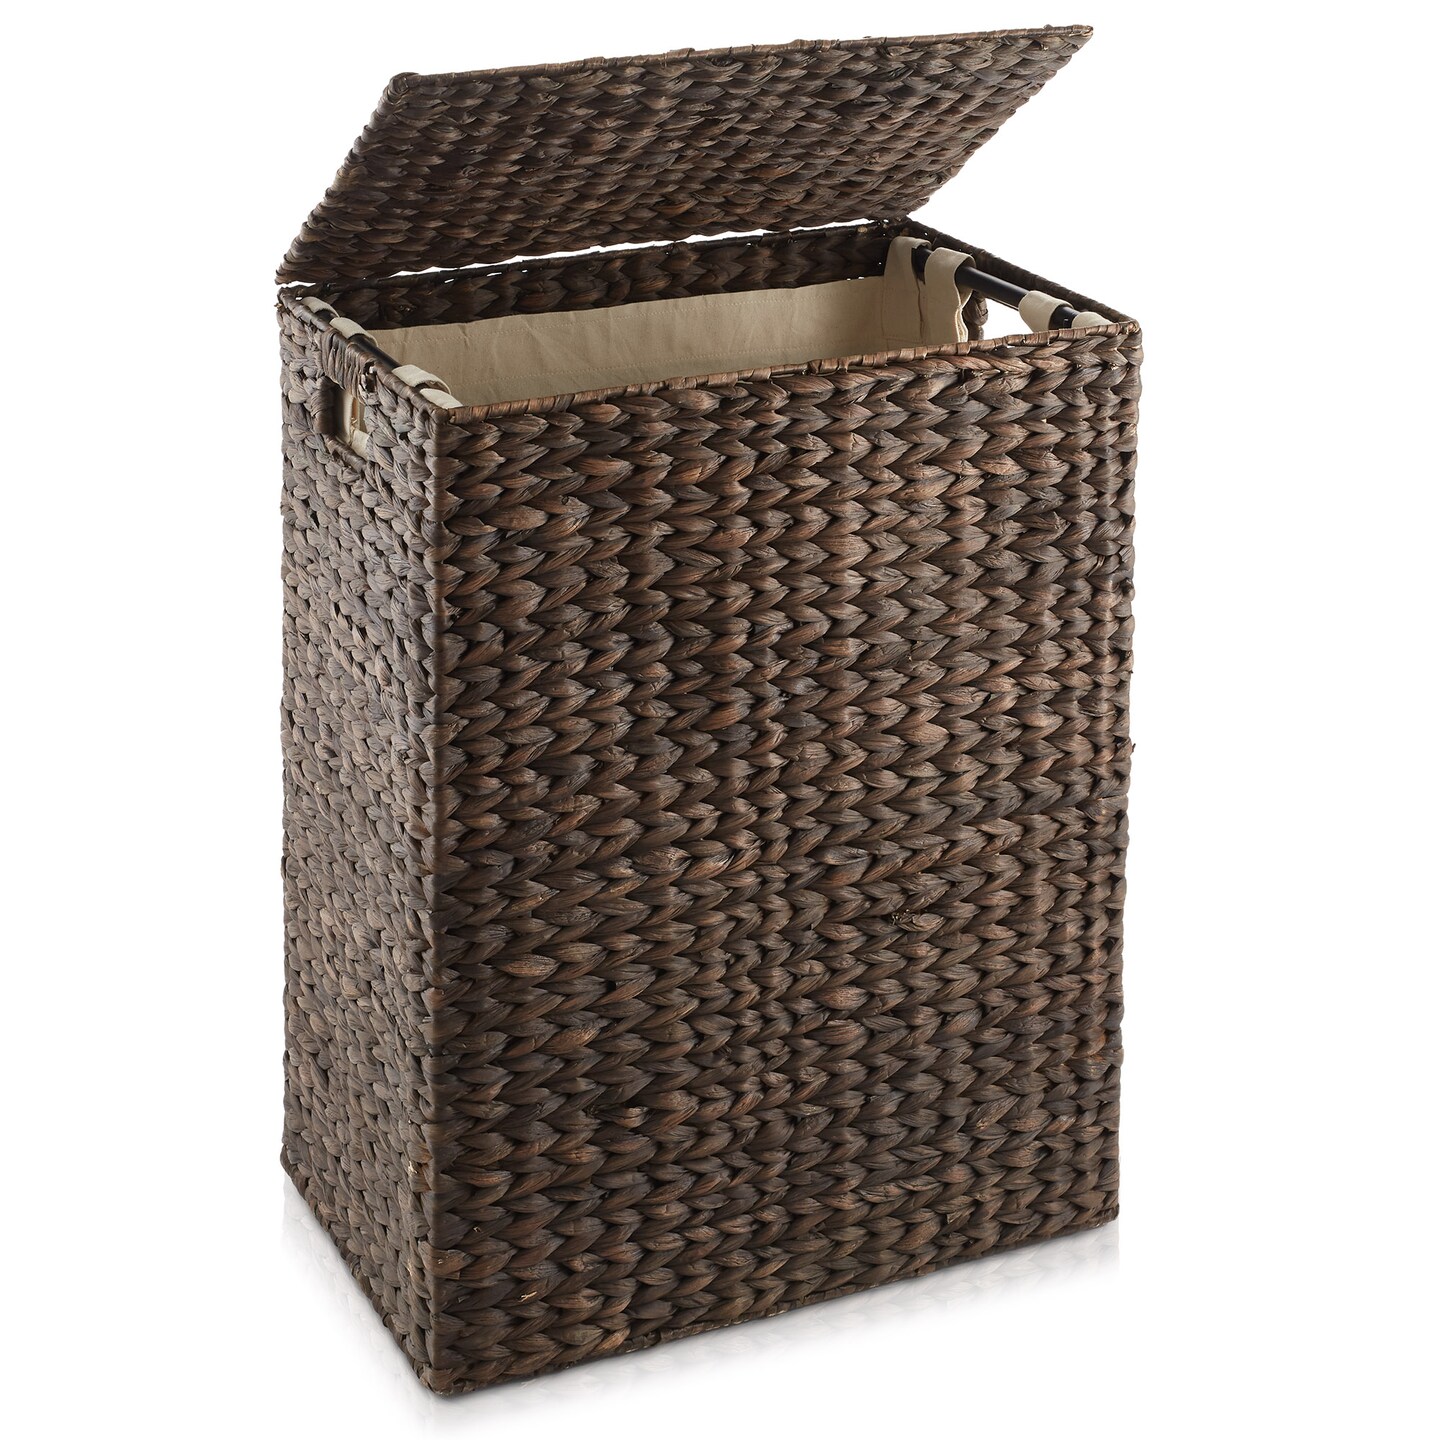 Casafield Large Laundry Hamper with Lid and Removable Liner Bag, Woven Water Hyacinth Rectangular Laundry Basket Sorter for Clothes and Towels